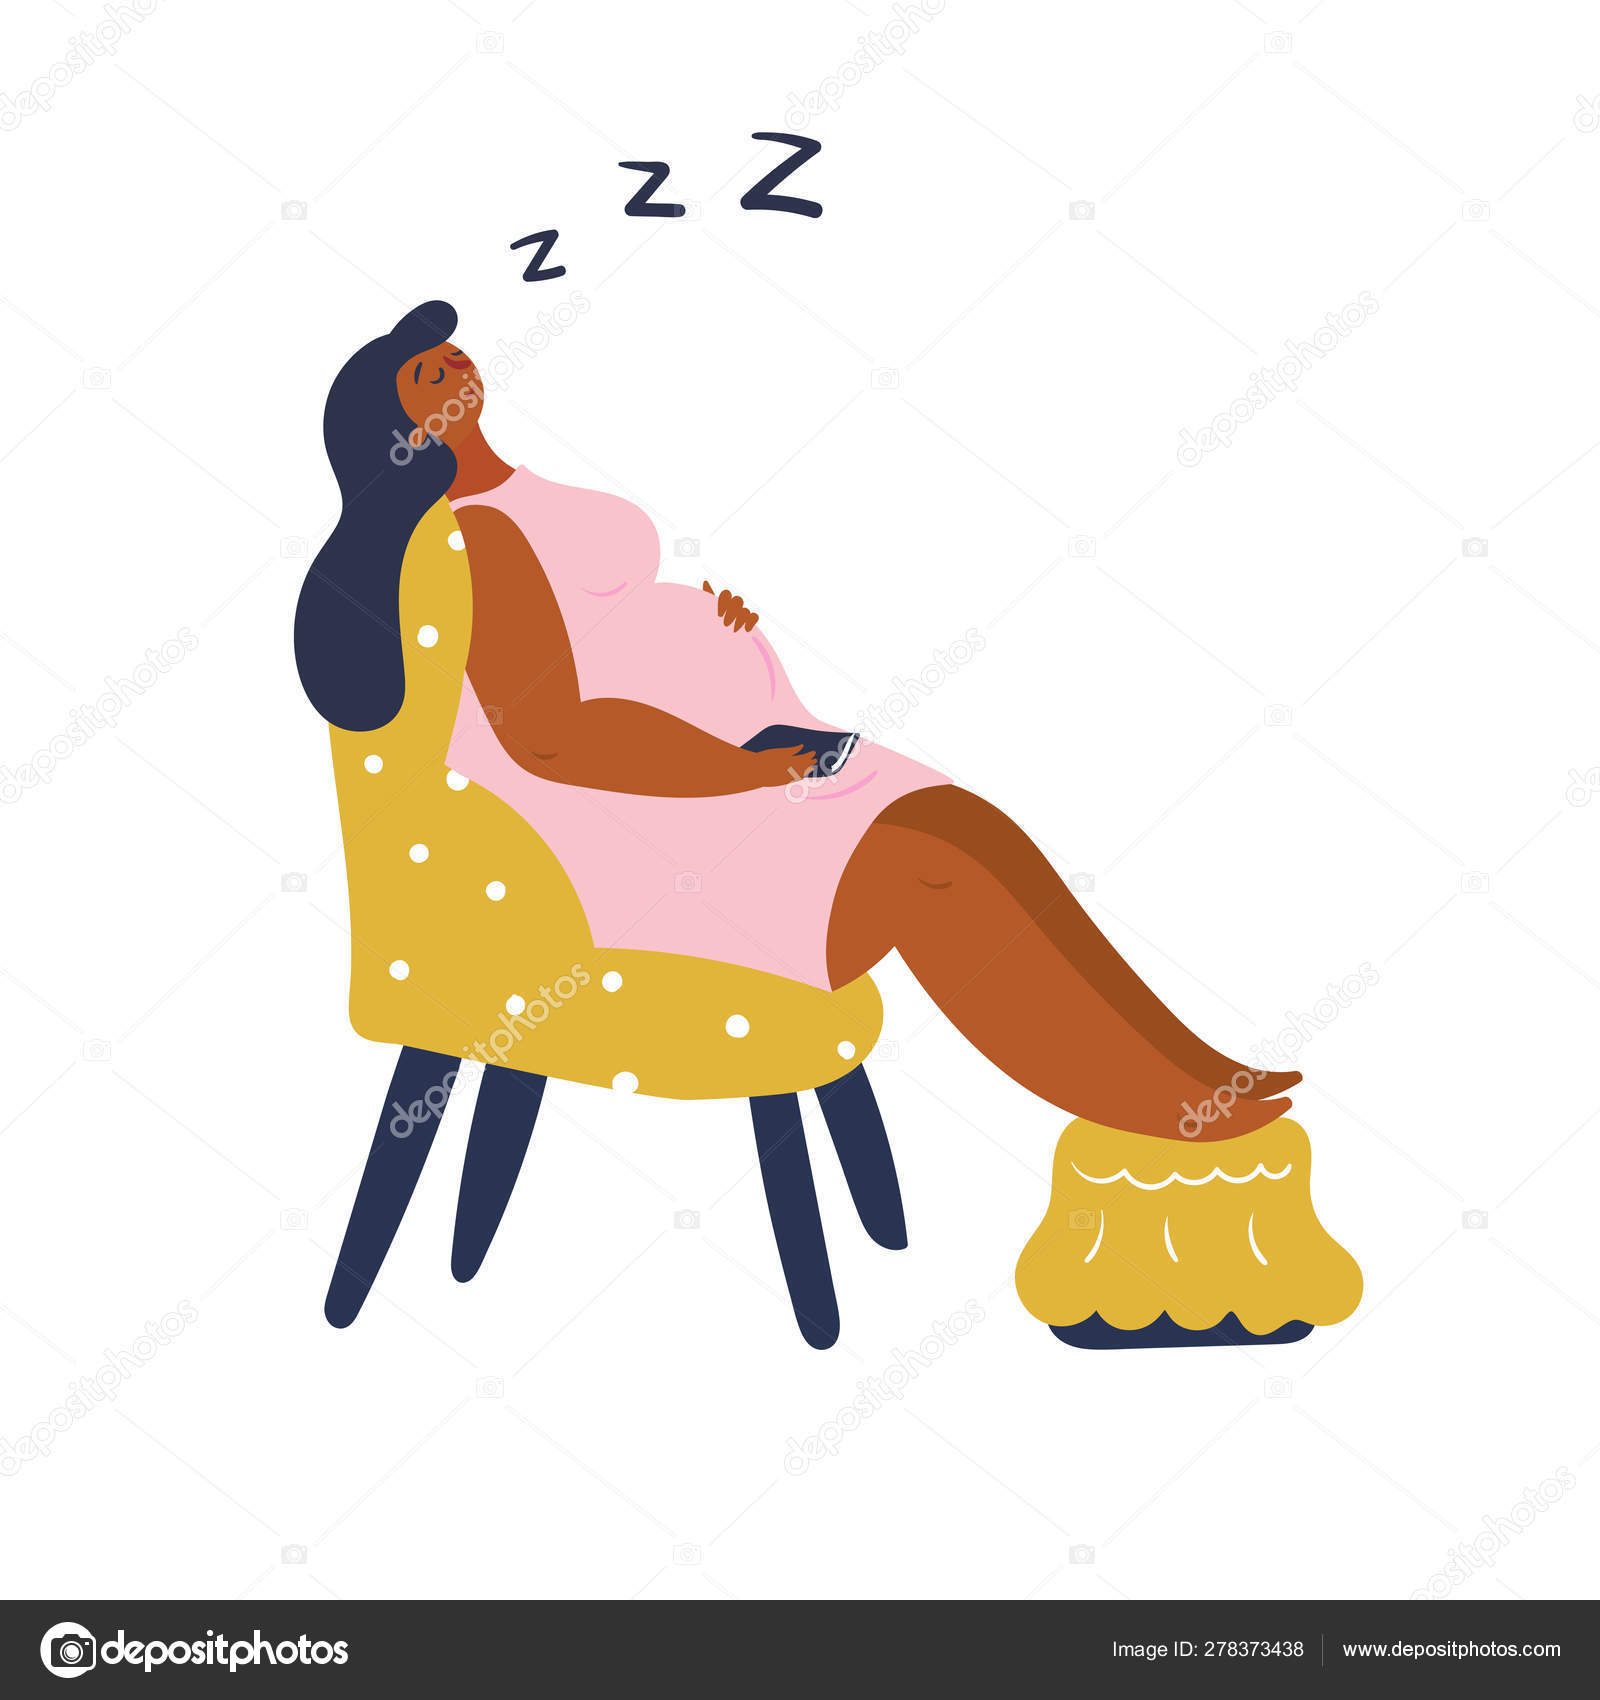 Sleeping pregnant woman is resting on the yellow chair Stock